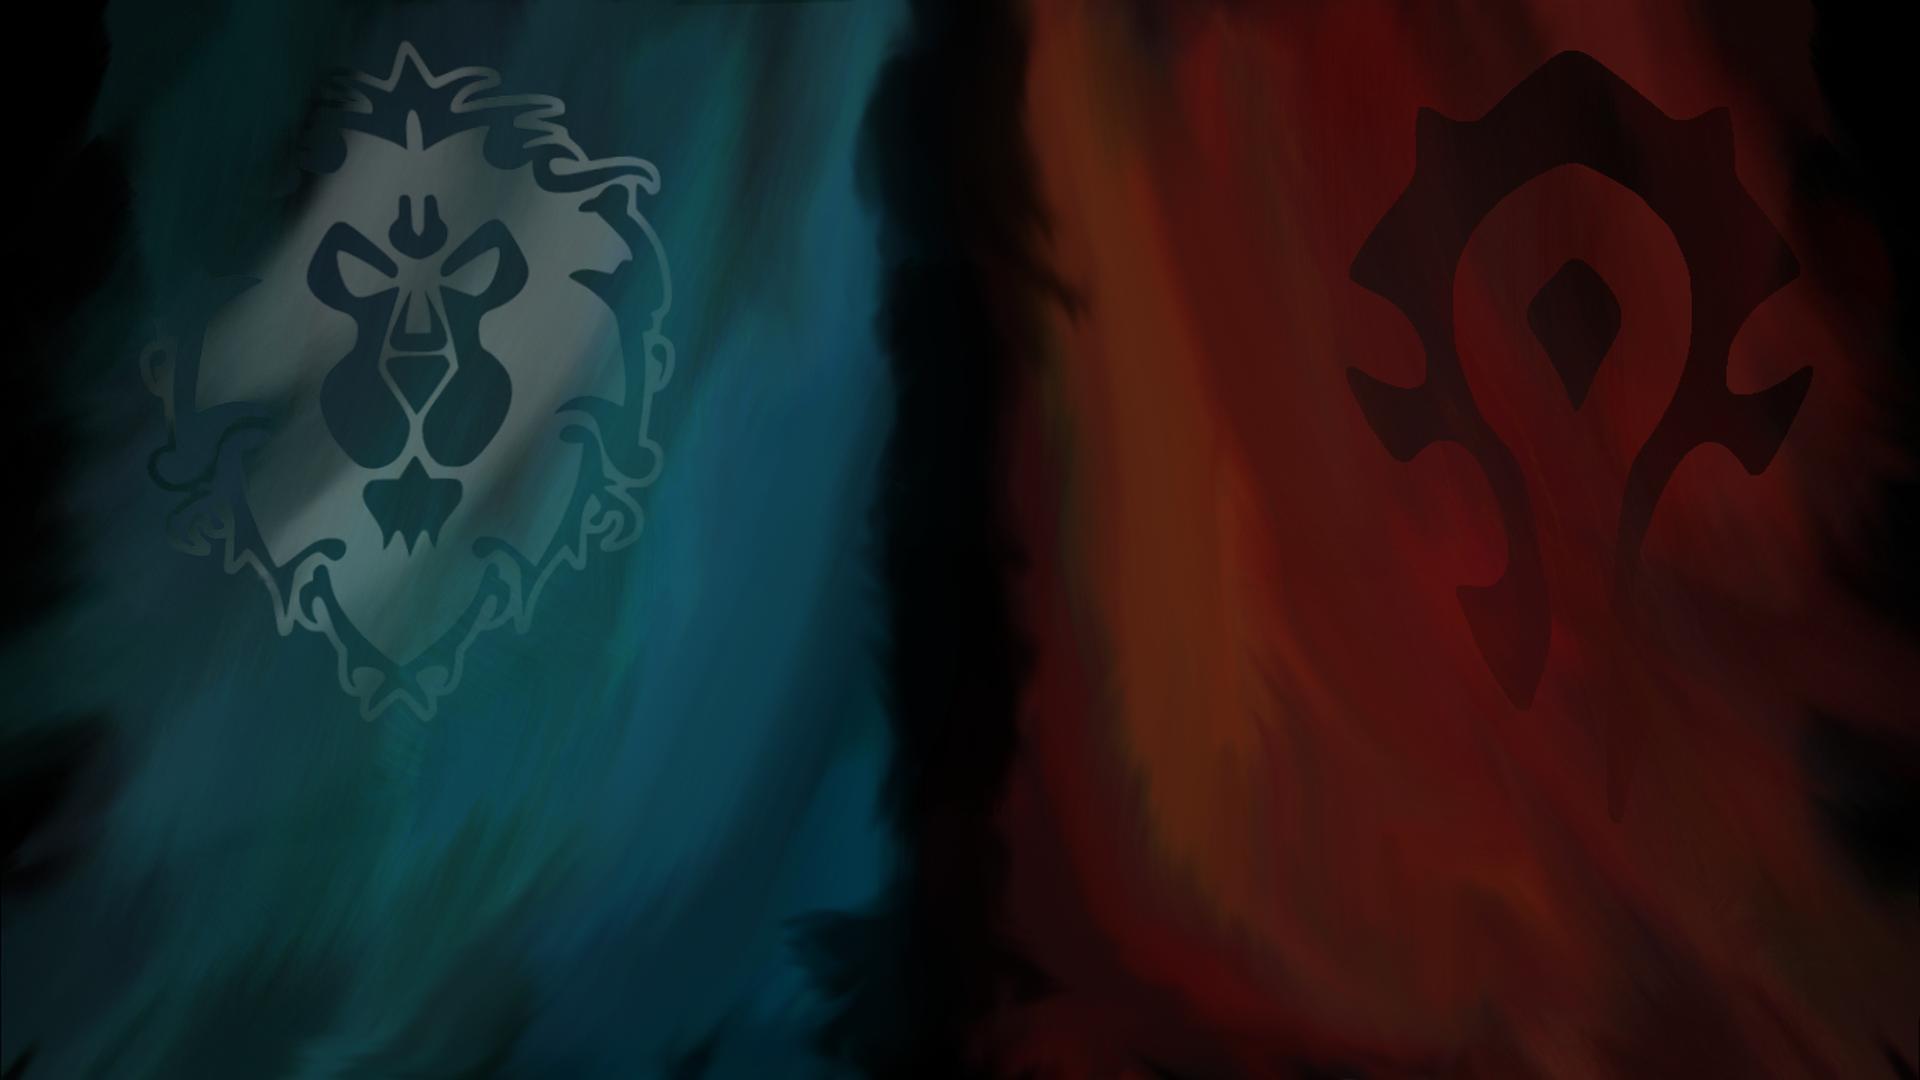 Larger Alliance and Horde background as requested. [1920x1080]